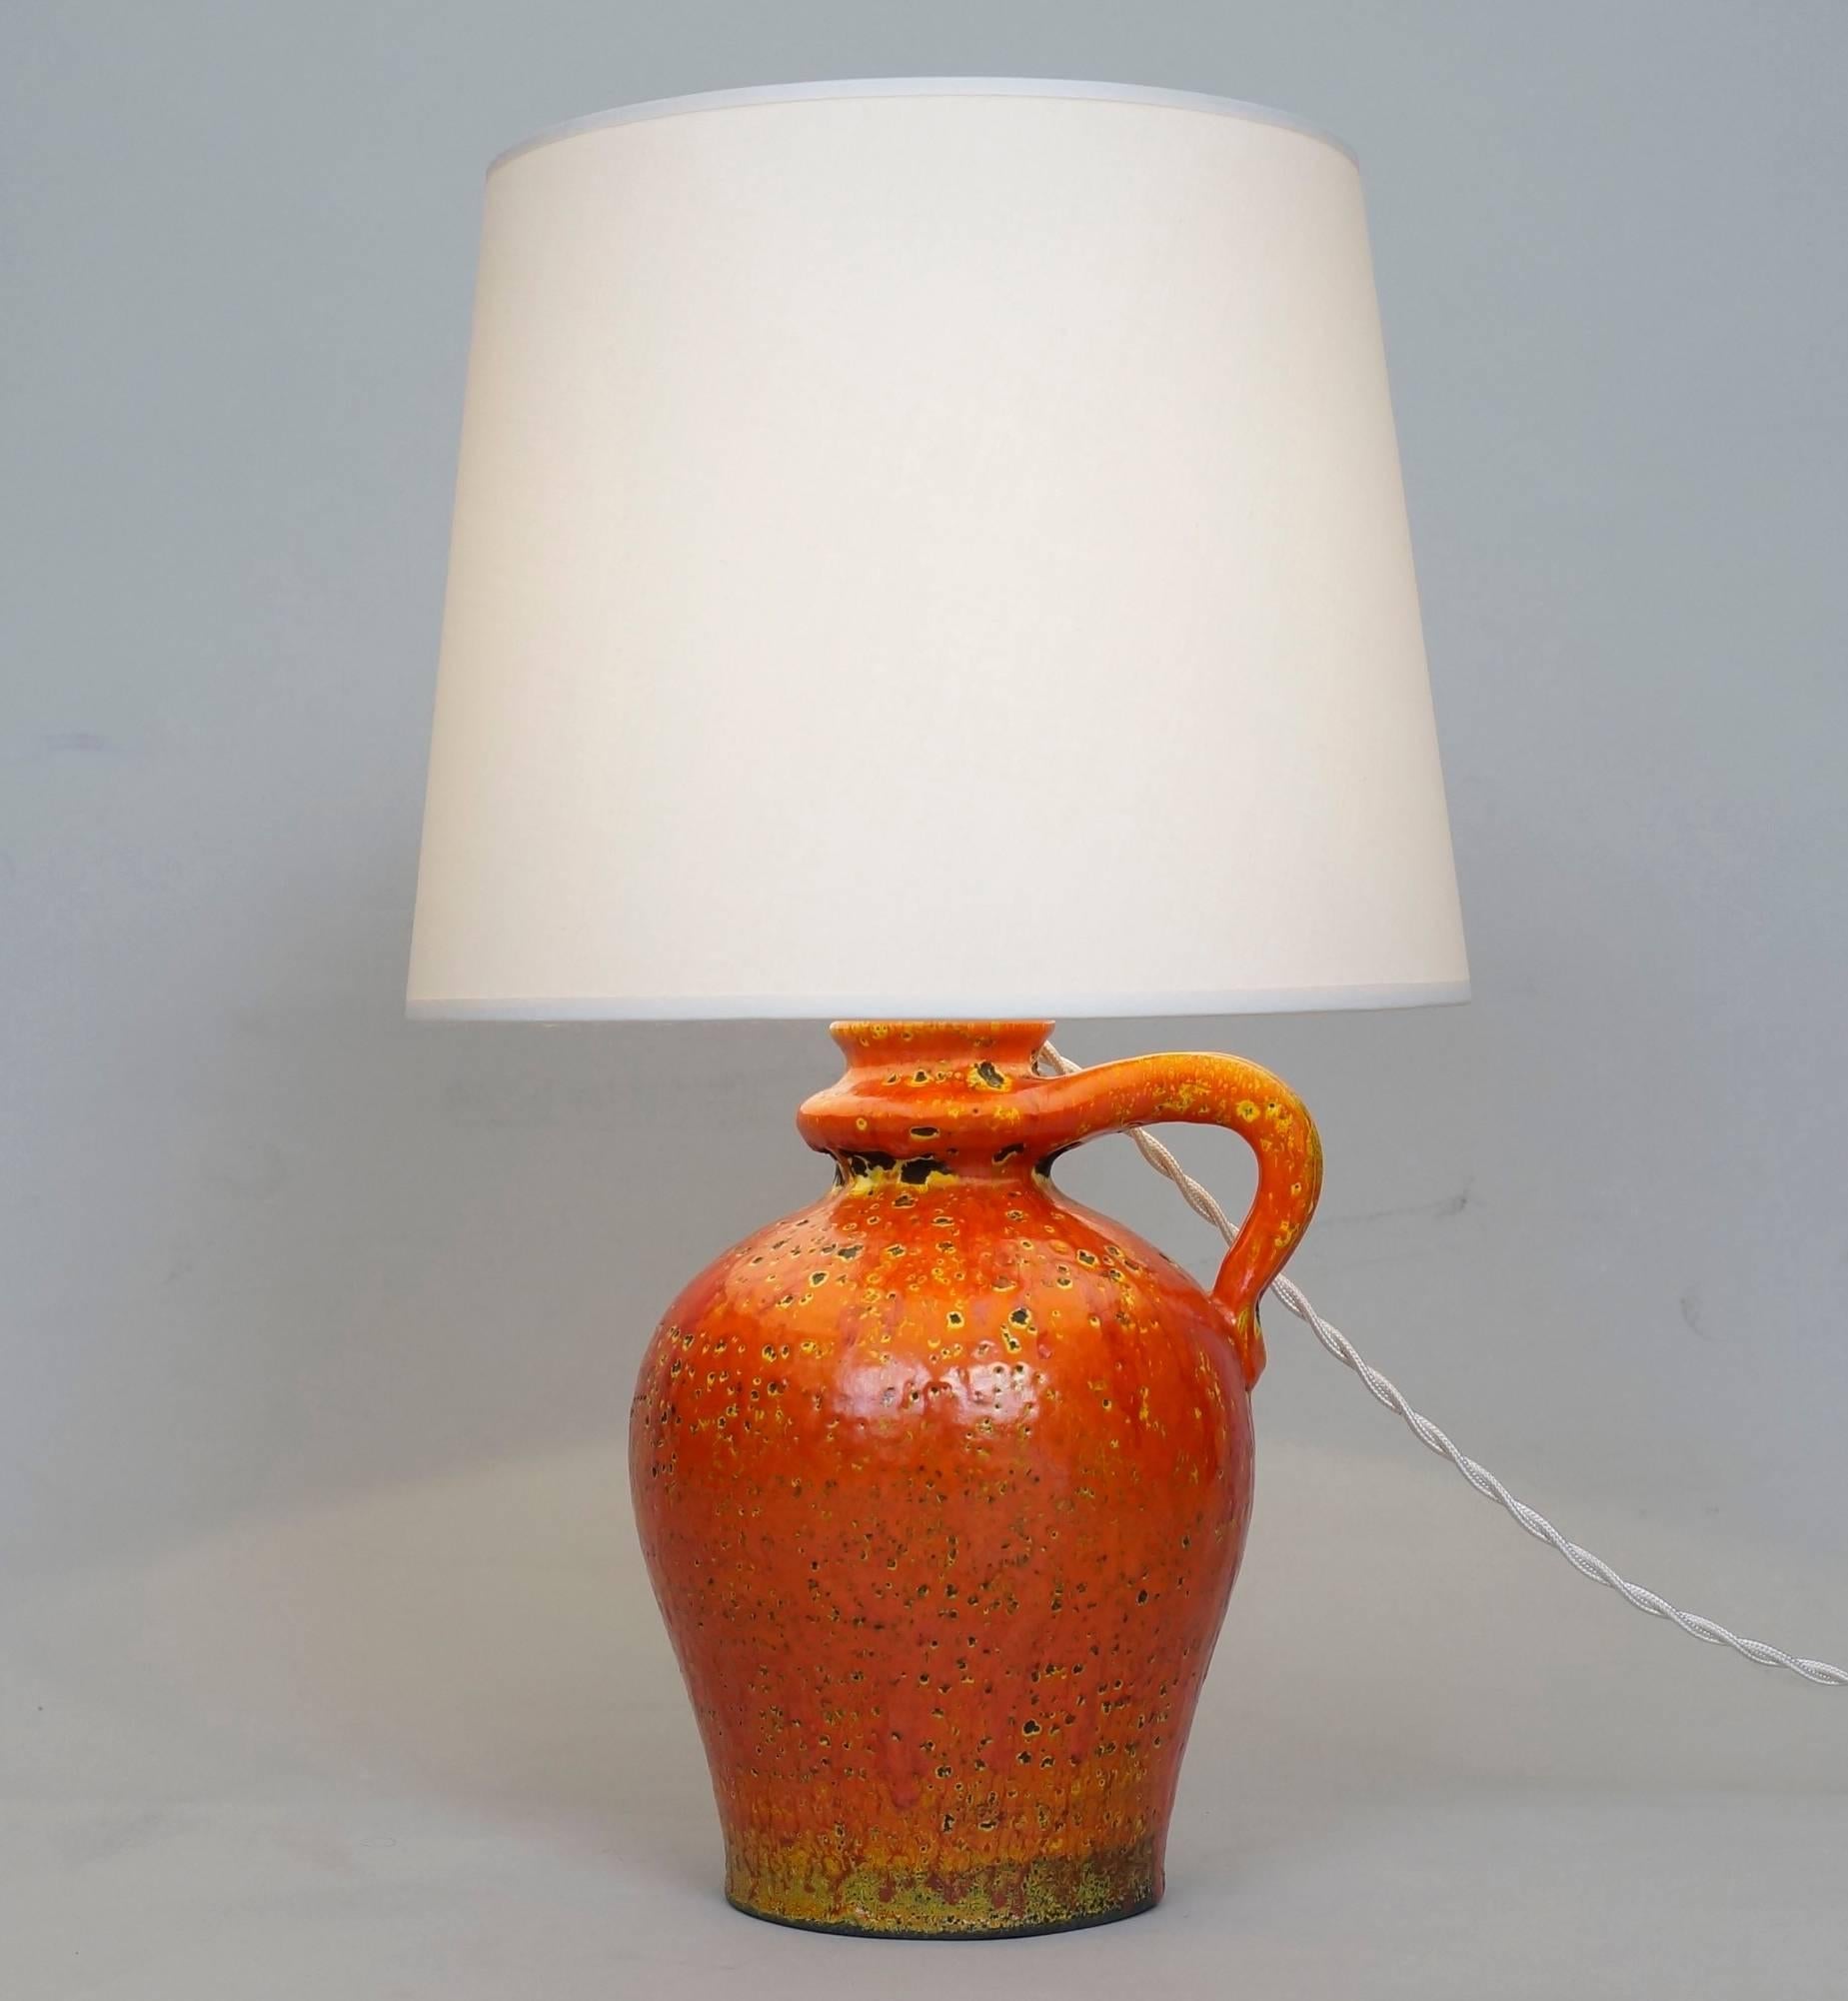 Corail ceramic table lamp by André Freymond signed under the base
Custom-made fabric lampshade.
Rewired with twisted silk cord.
US standard plug on request.
Ceramic body height: 18 cm - 7.1 in.
Height with lampshade: 36 cm - 14.2 in.
 